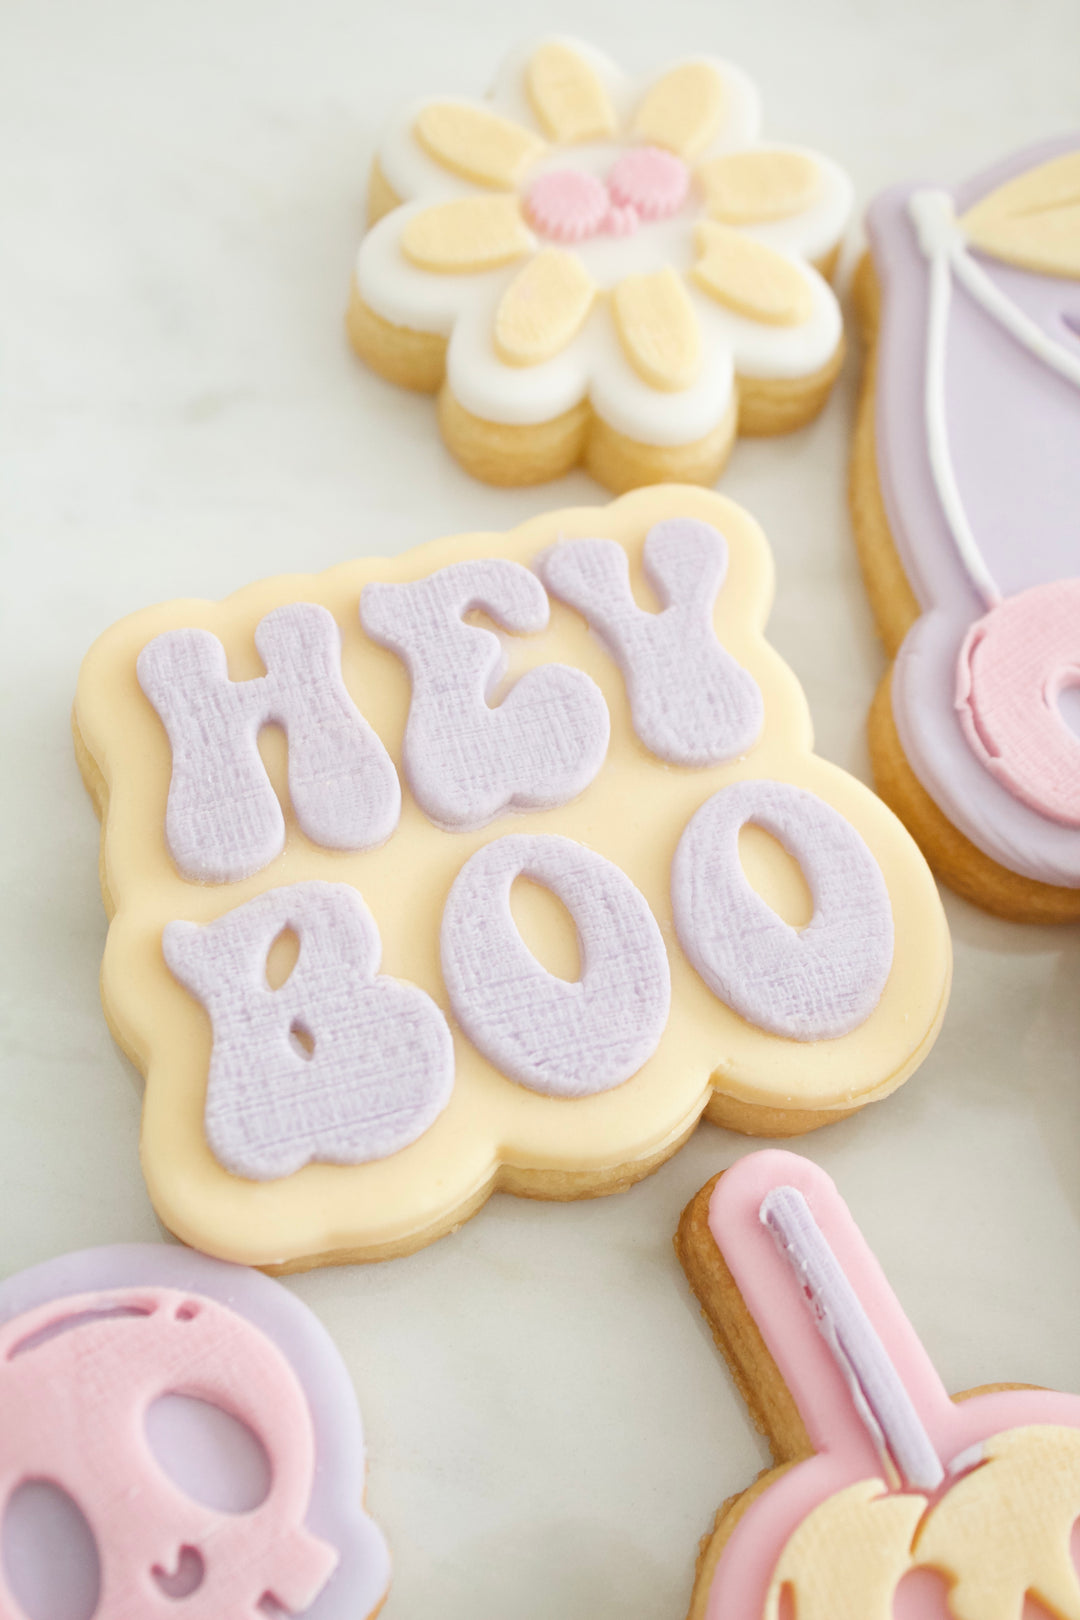 Hey Boo + cookie cutter